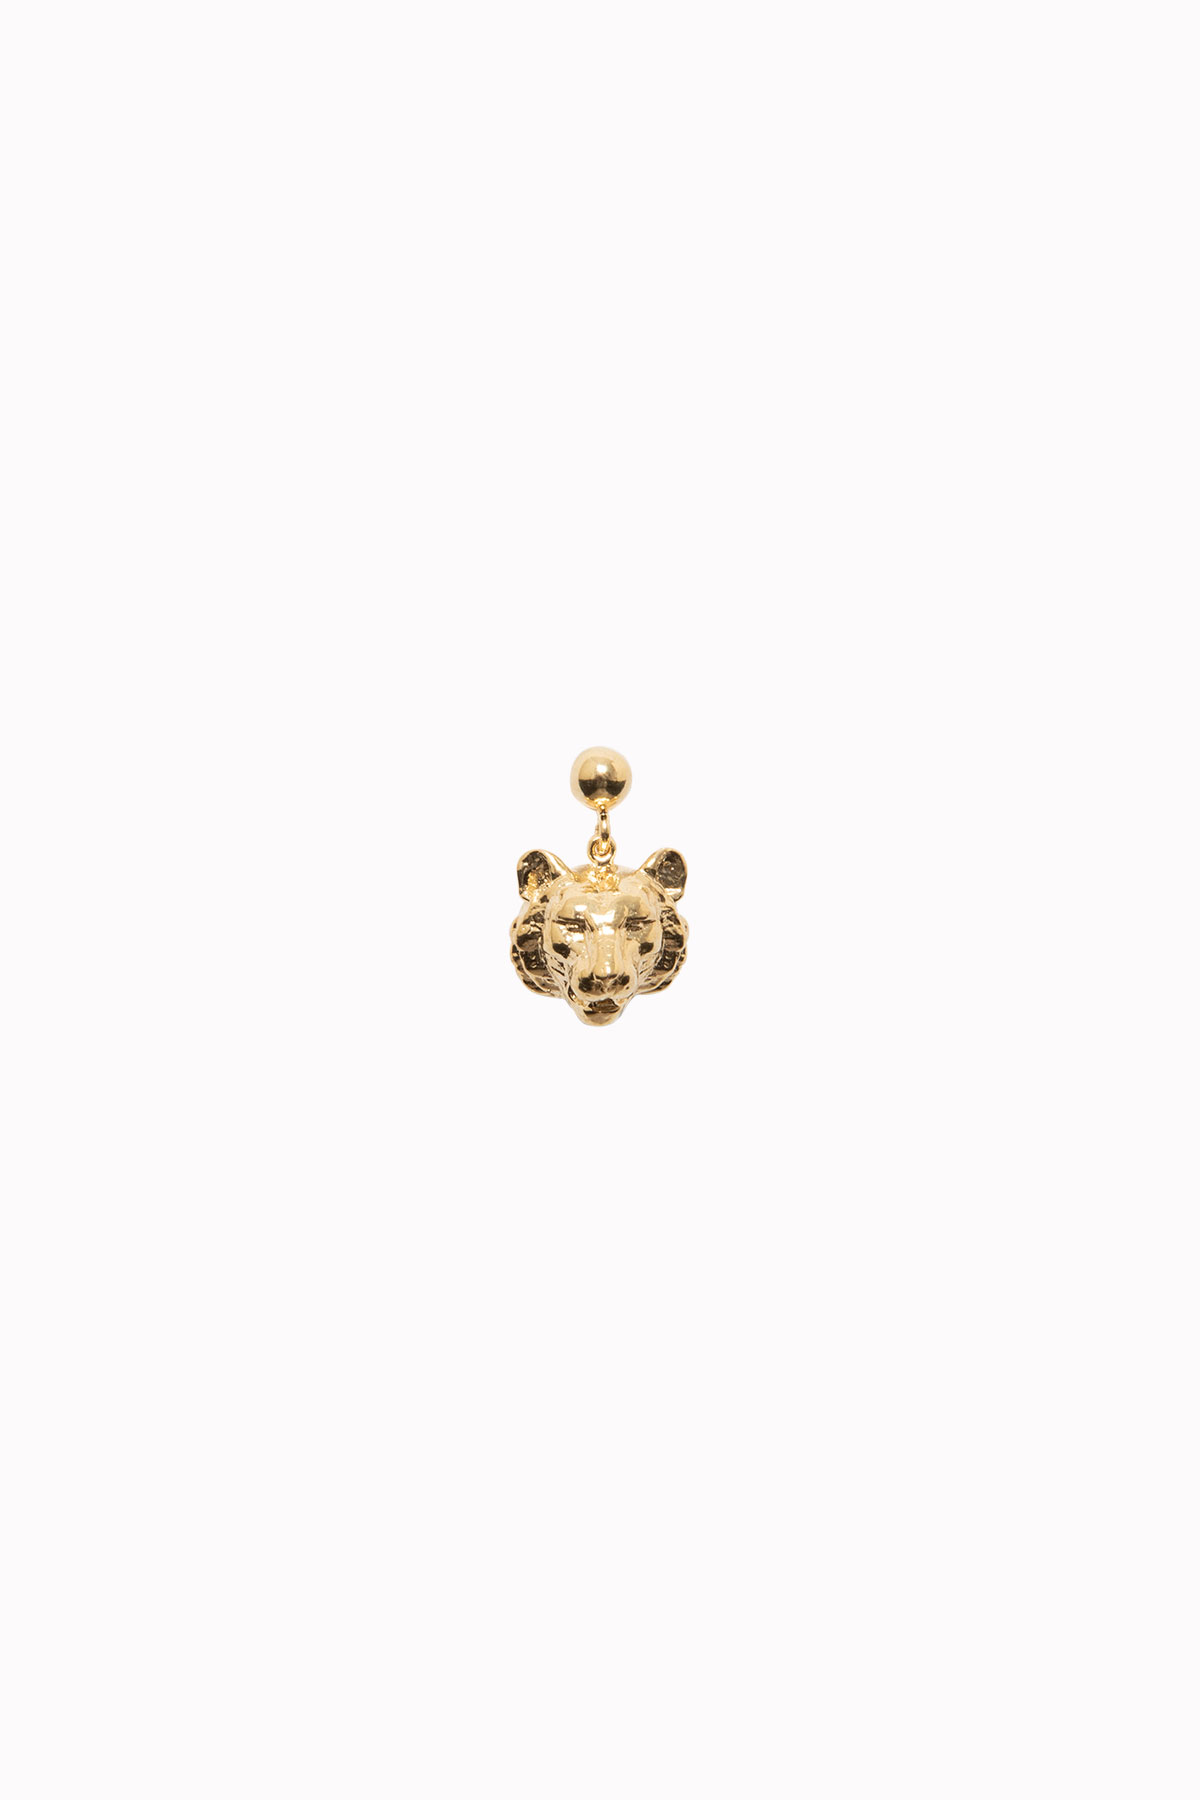 Ball and lion head earring